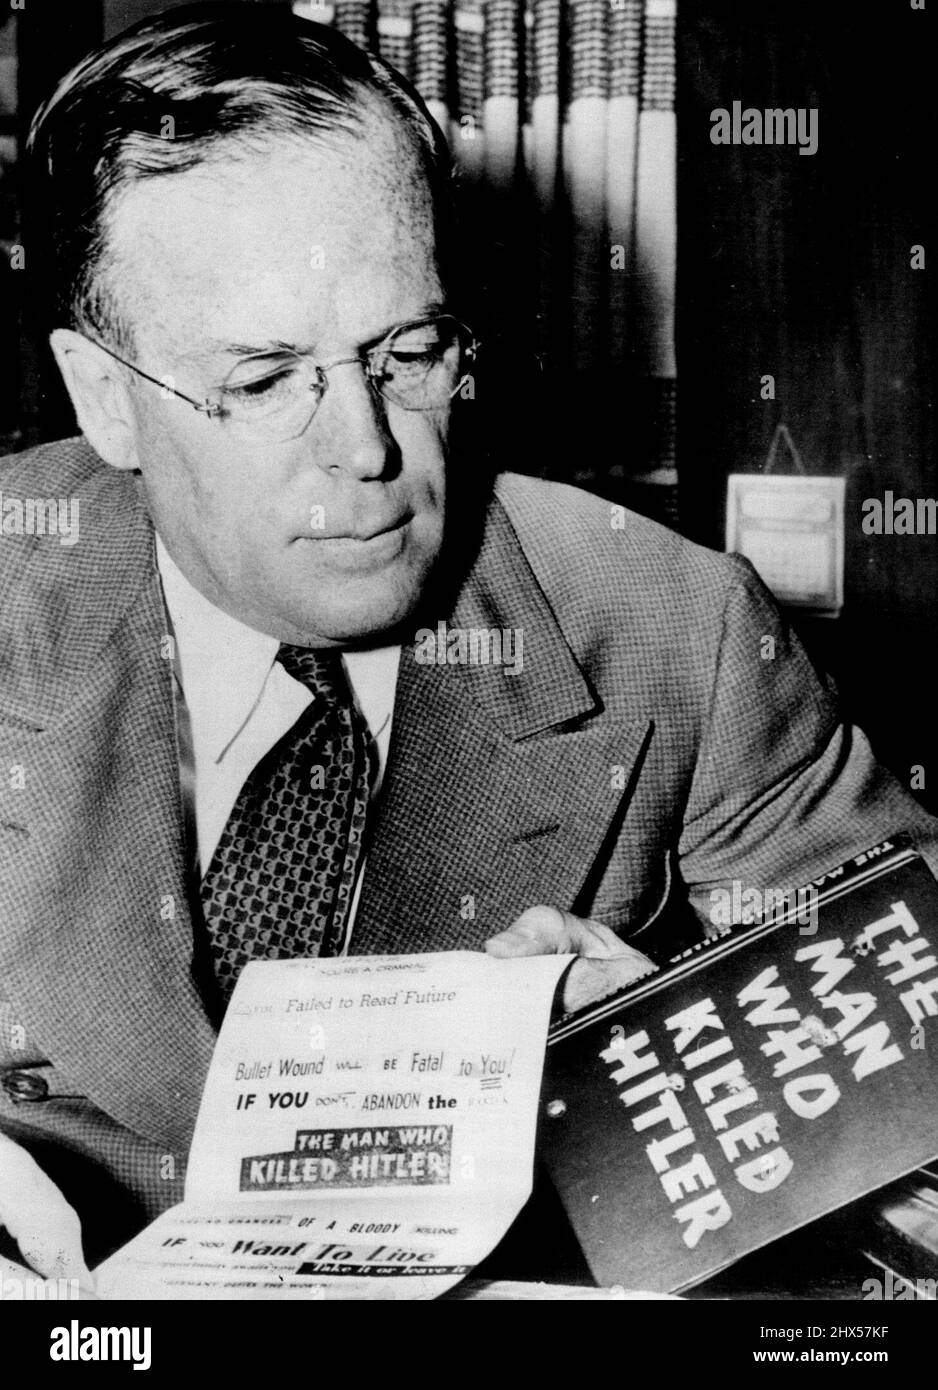 Bullet - Ridden Warning To Publisher Of 'Man Who Killed Hitler' Book -- Putnam holding the bullet ridden copy of the book 'The Man who killed Hitler'. Some weeks ago a book was published in New York by a usually Reputable firm claiming that her Hitler had been killed on the Night before the Munich conference. It claimed to be written by one of the doubles taking der fuether's Part. George palmer Putnam, husband of the late Amelia earhart was the publisher. He was had three ***** warnings. The last was a bullet-ridden copy of his *****. May 15, 1939. Stock Photo